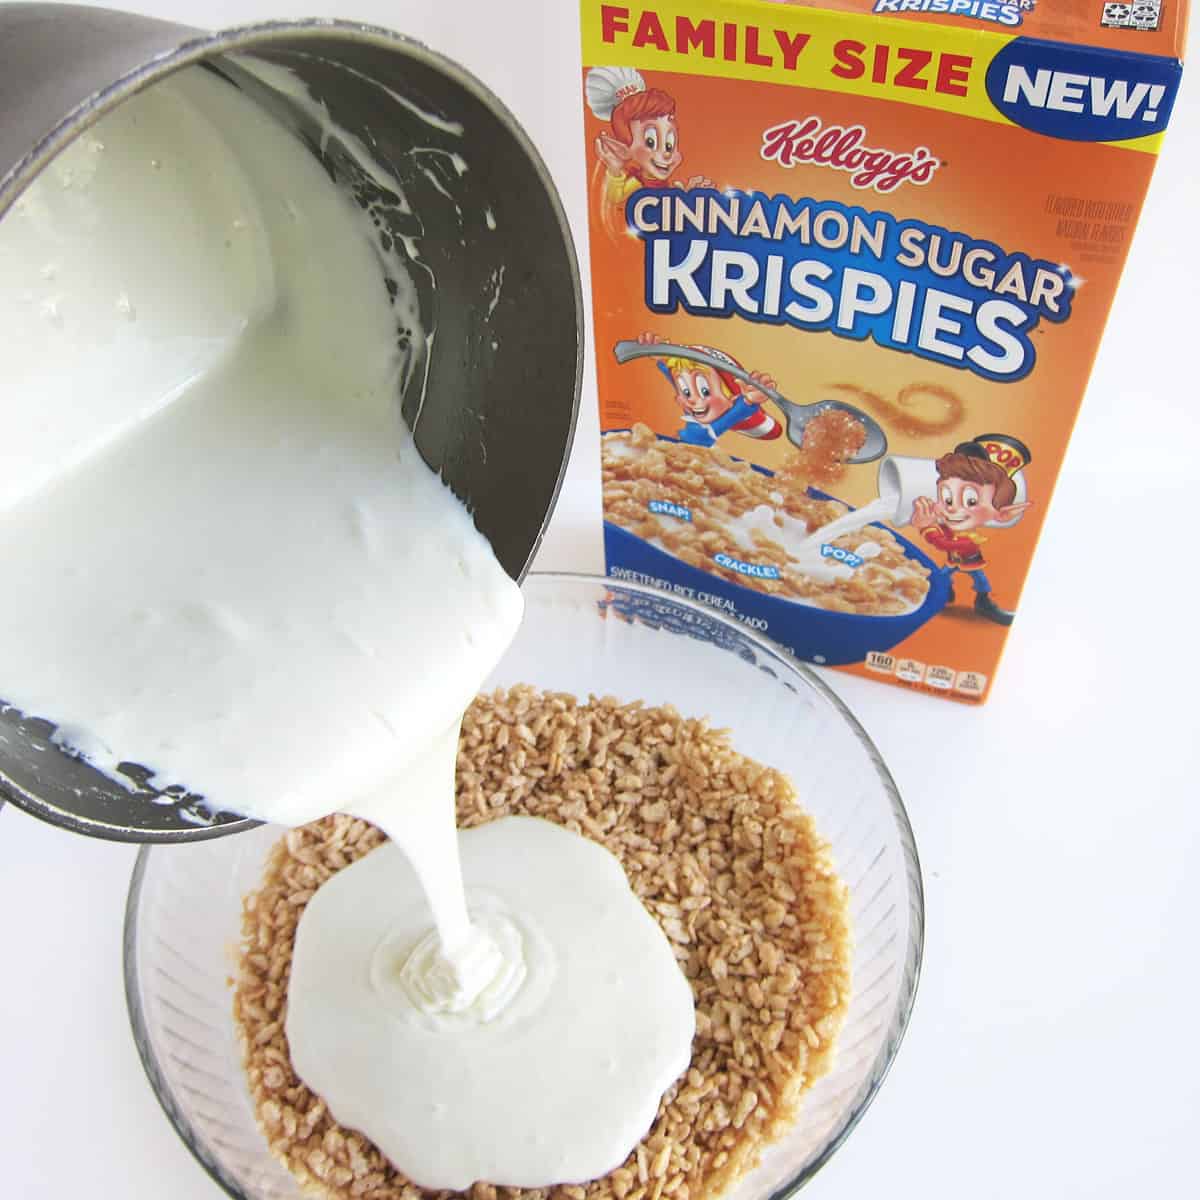 Melted butter and marshmallows being poured over Kellogg's Cinnamon Sugar Krispies in a mixing bowl next to a box of the Rice Krispies cereal.